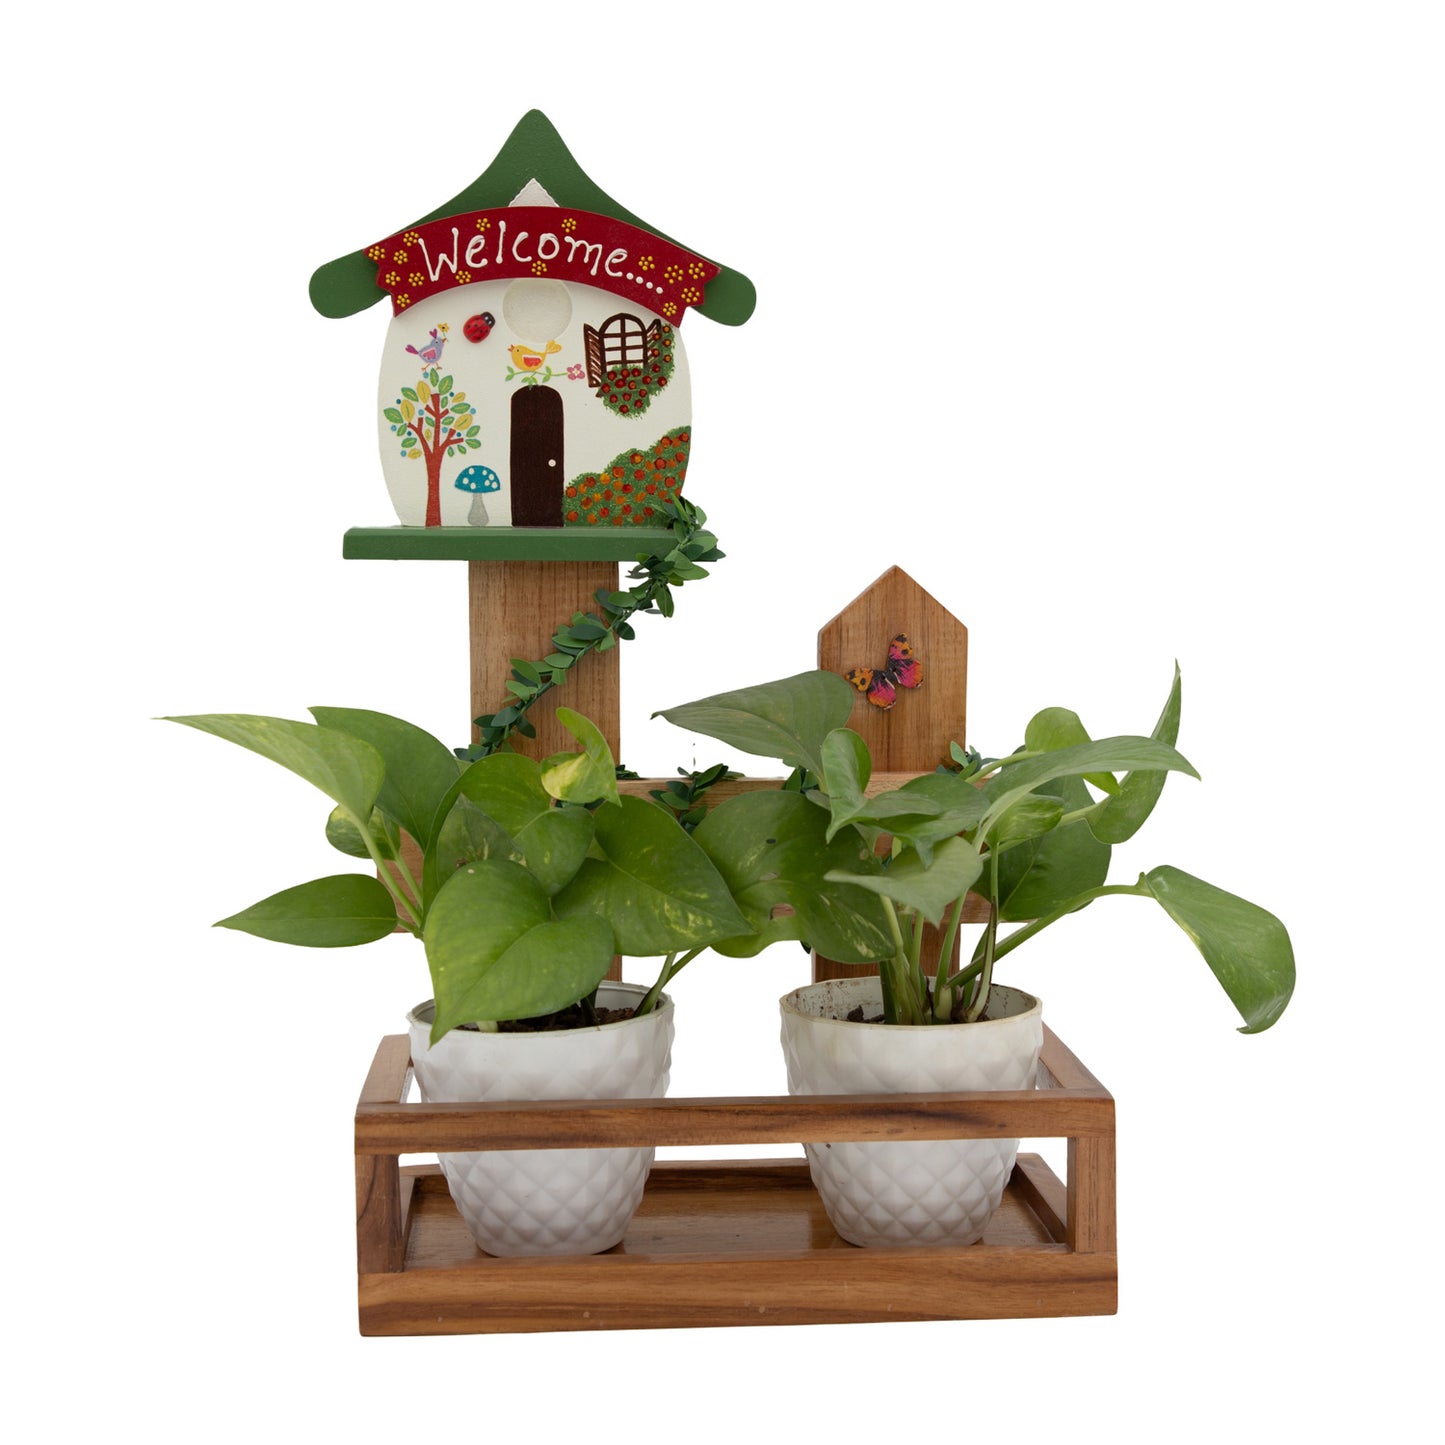 The Weaver's Nest: Wooden Hand Painted Welcome House Planter with Creeper